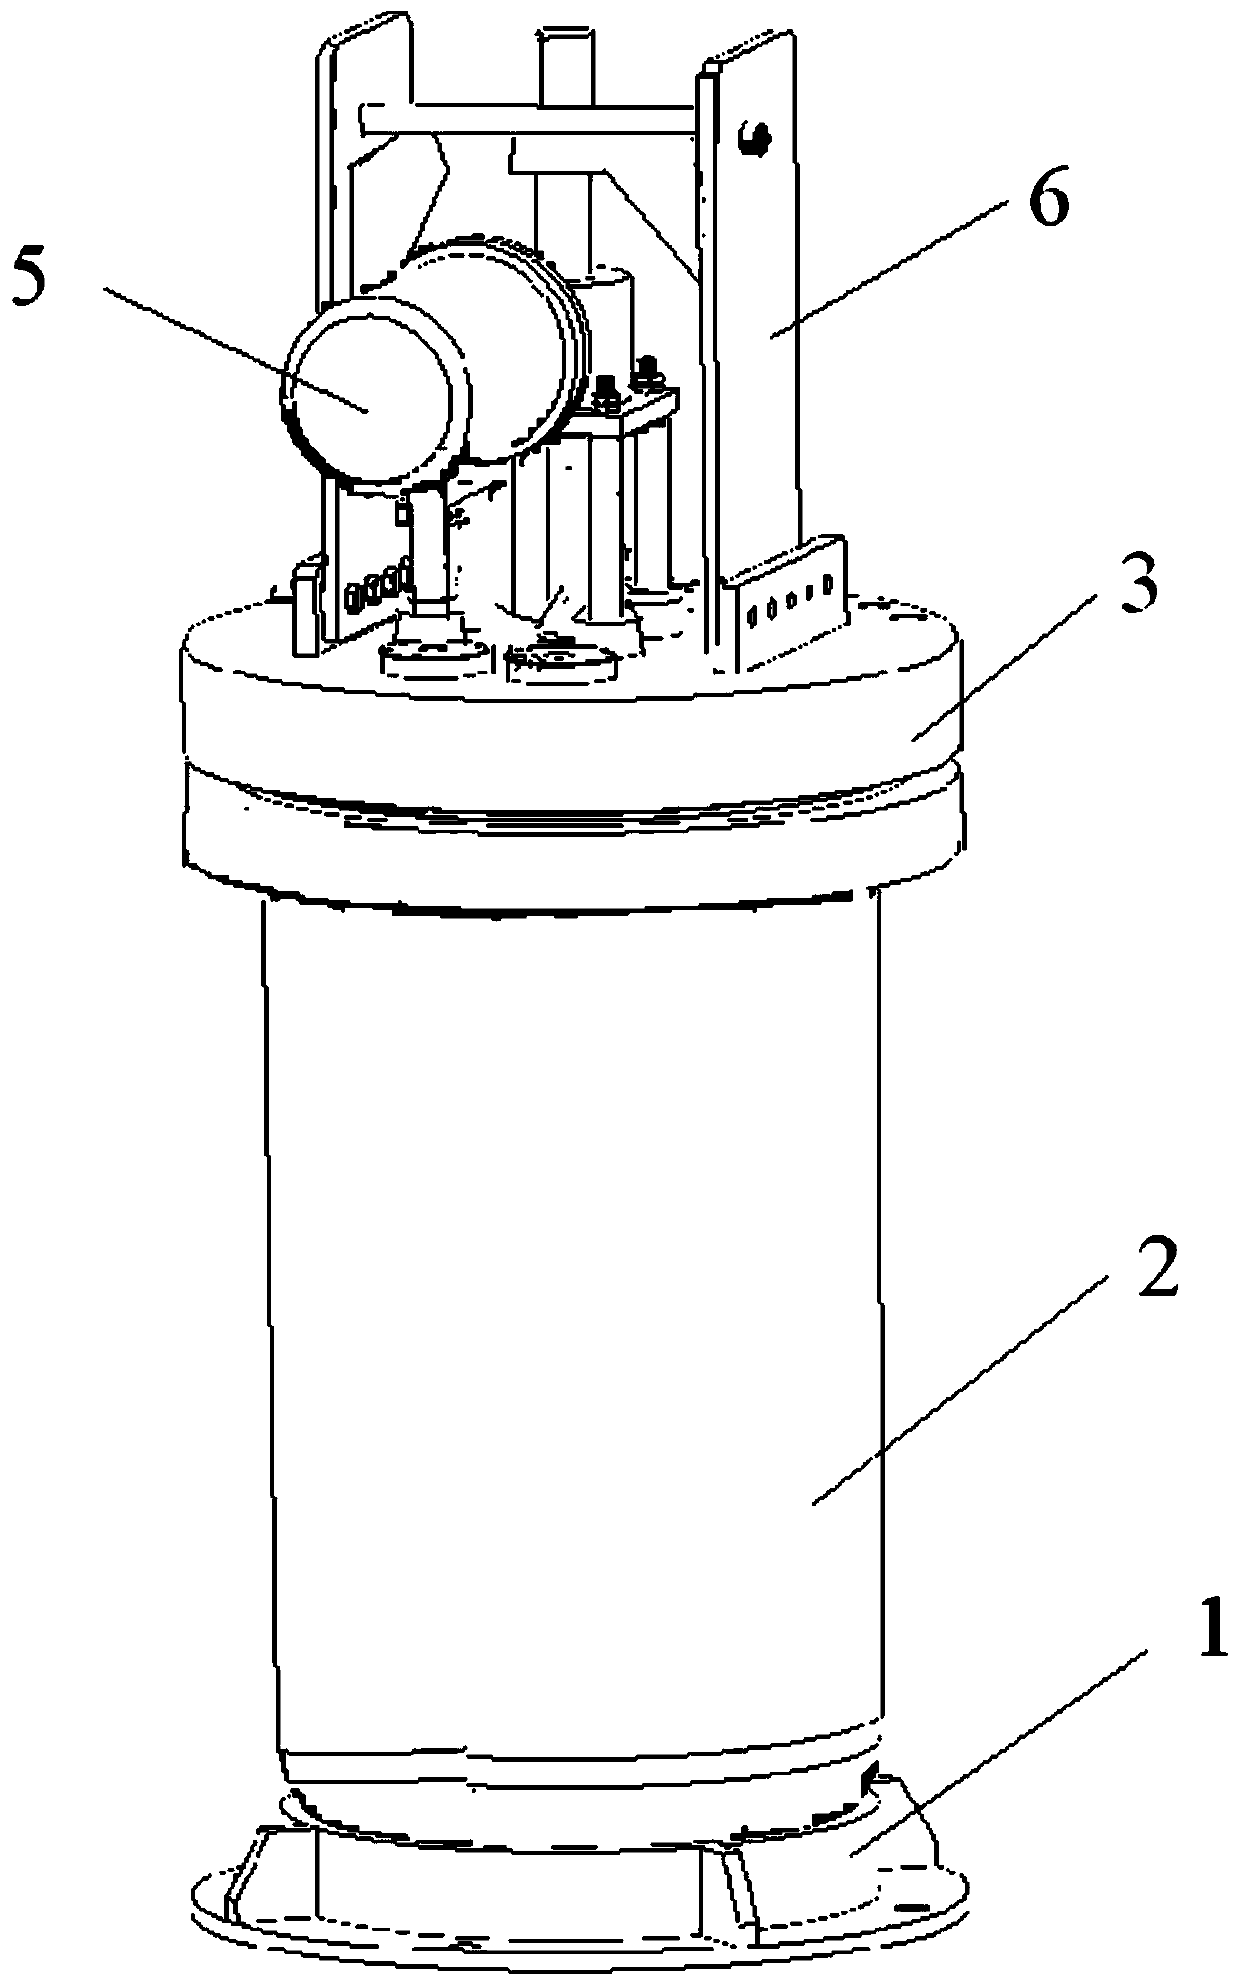 A pressure tank for testing the performance of underwater connectors